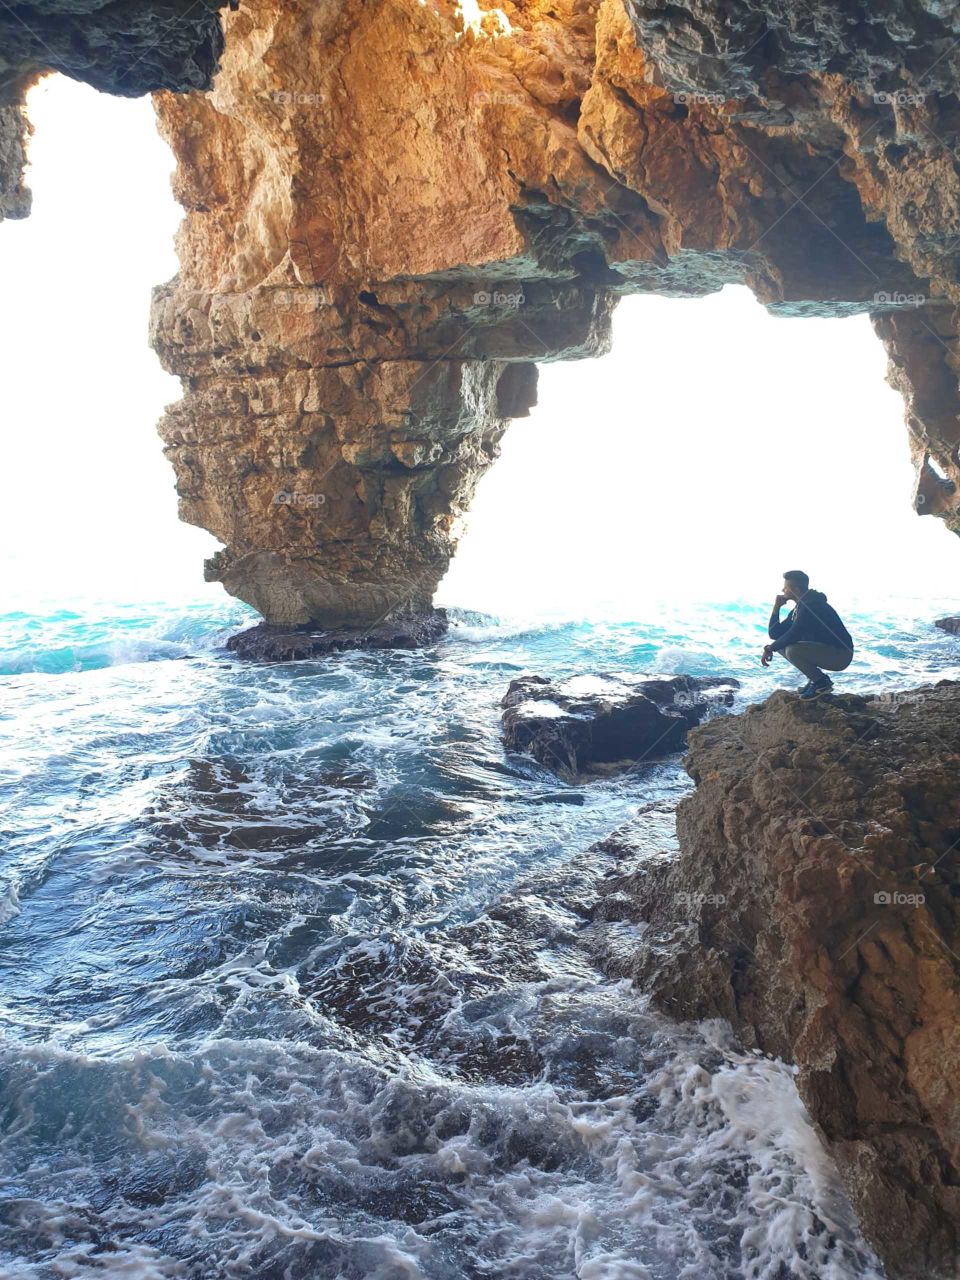 Caves#nature#sea#human#chill#waves#hiddenplace